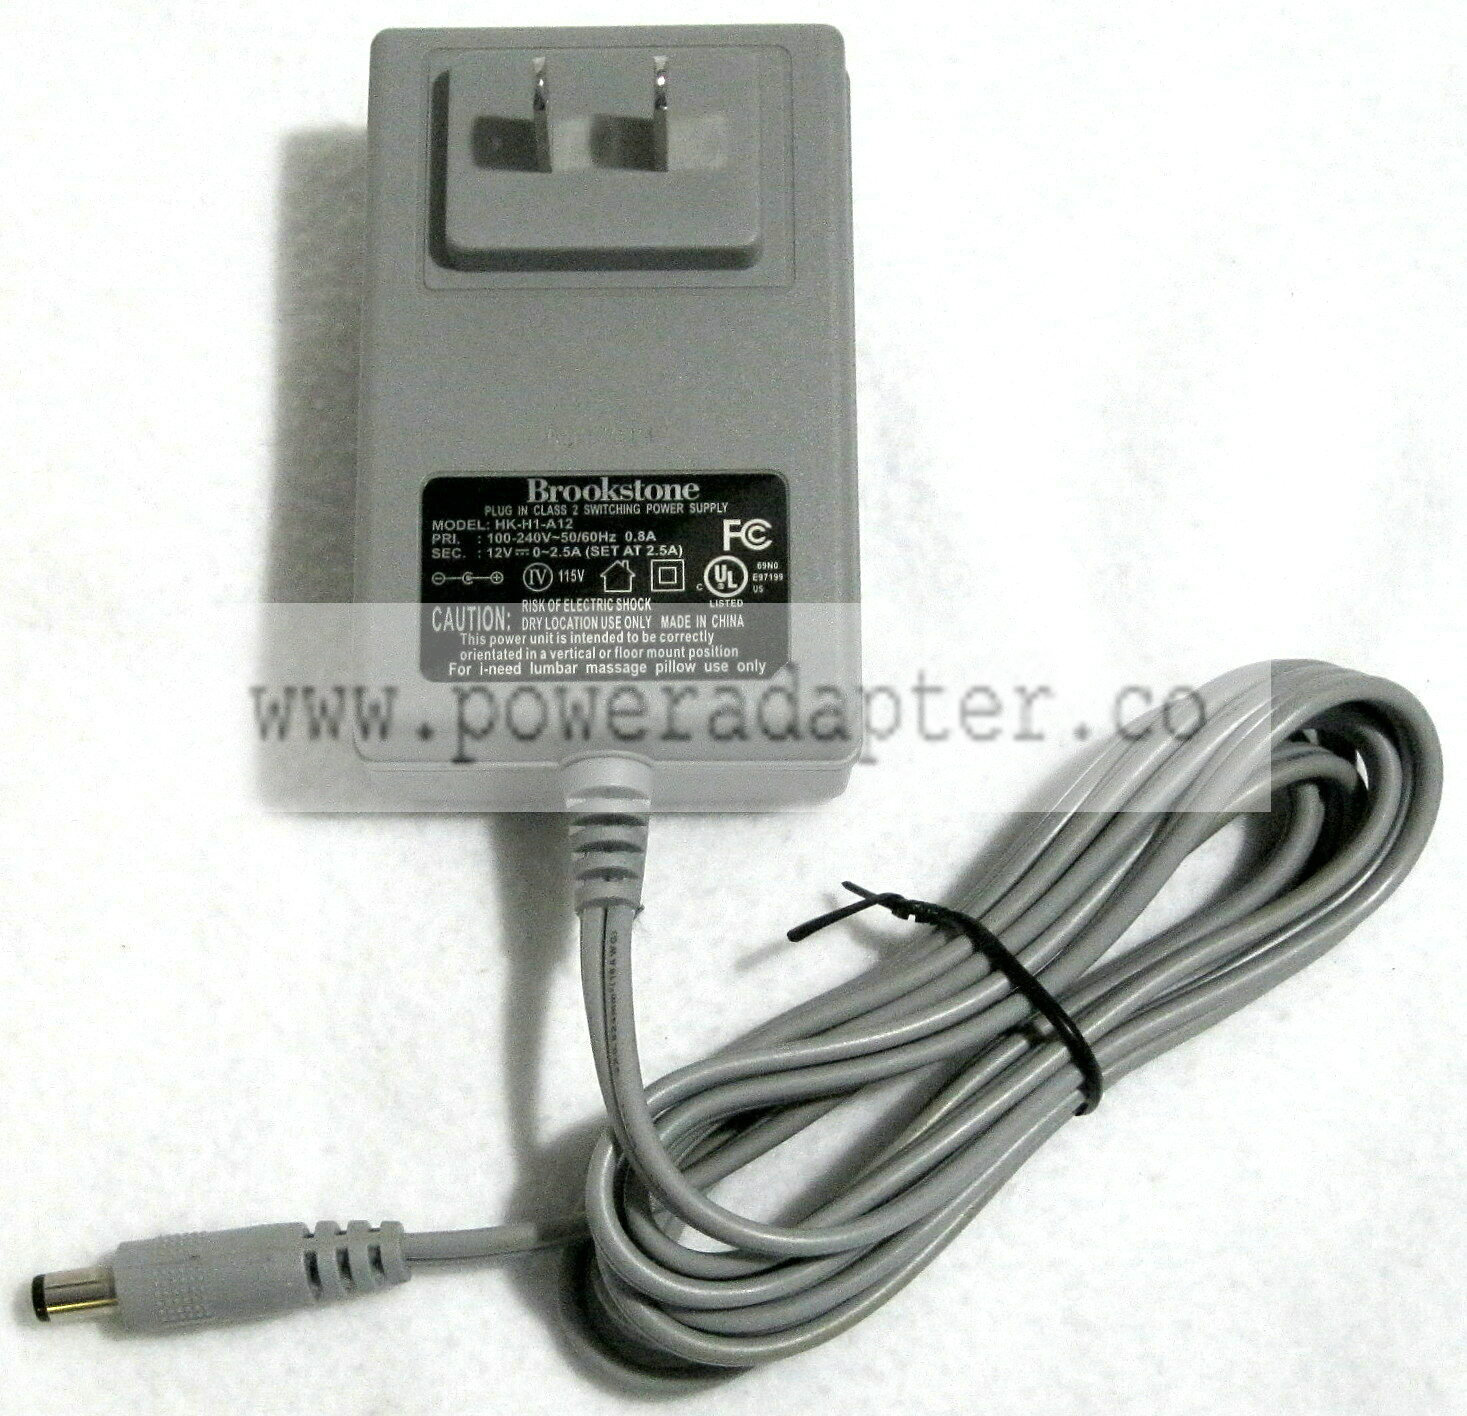 Brookstone HK-H1-A12 Power Supply AC DC Adapter 12V 0-2.5A EXCELLENT - TESTED Model: HK-H1-A12 Brand: Brookstone T